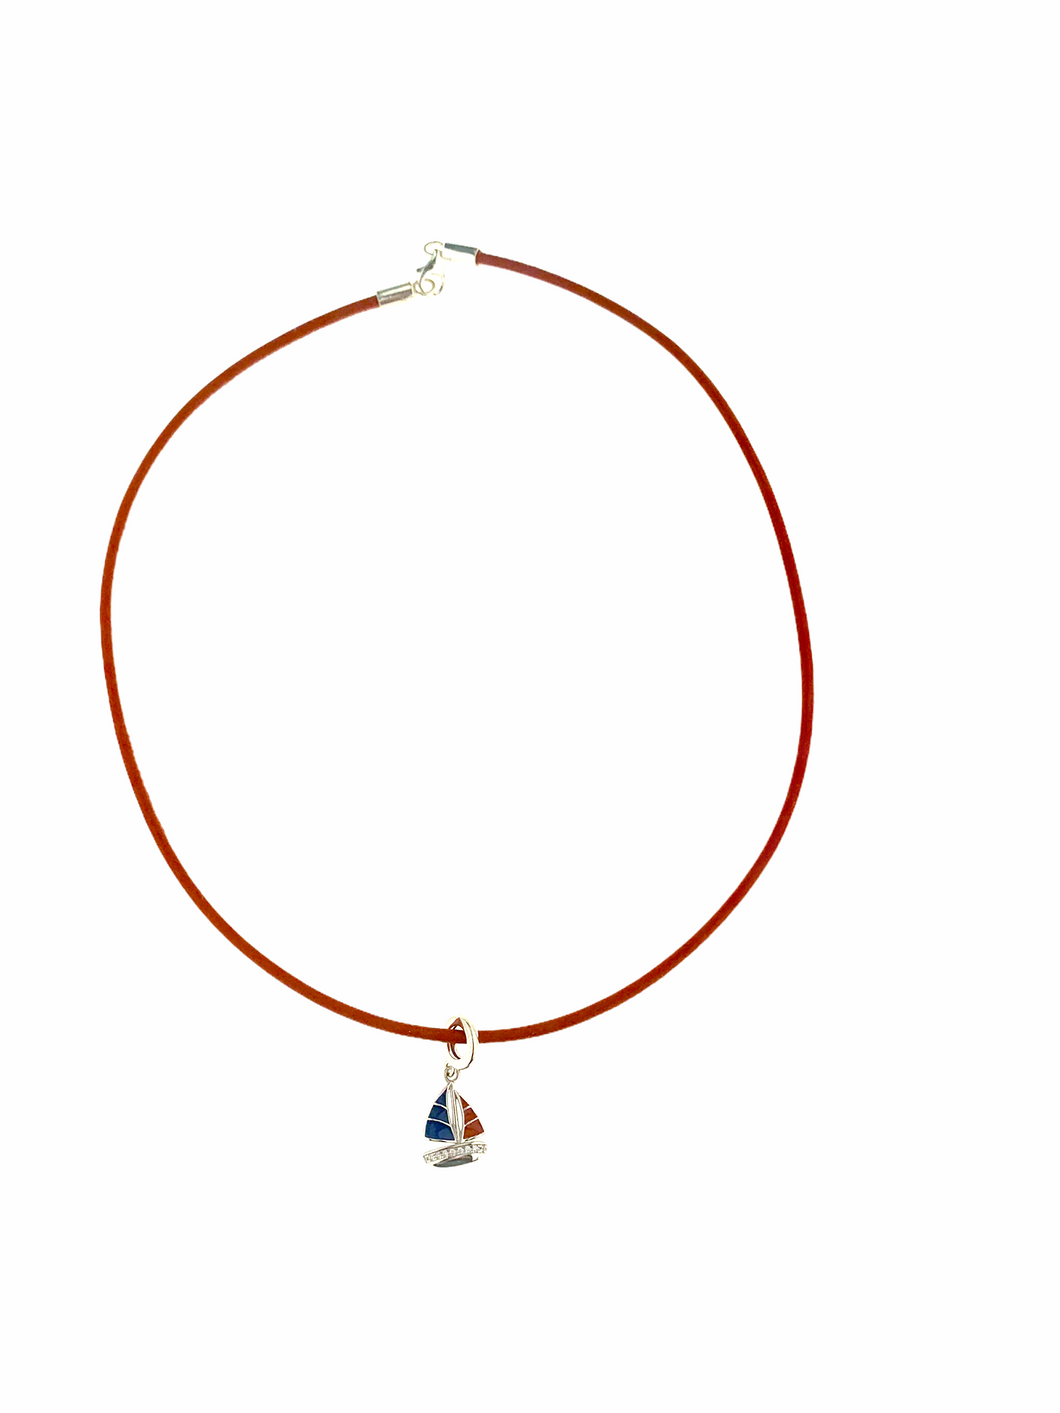 Beyond Southern Gates Red Leather Necklace with Sailboat Charm